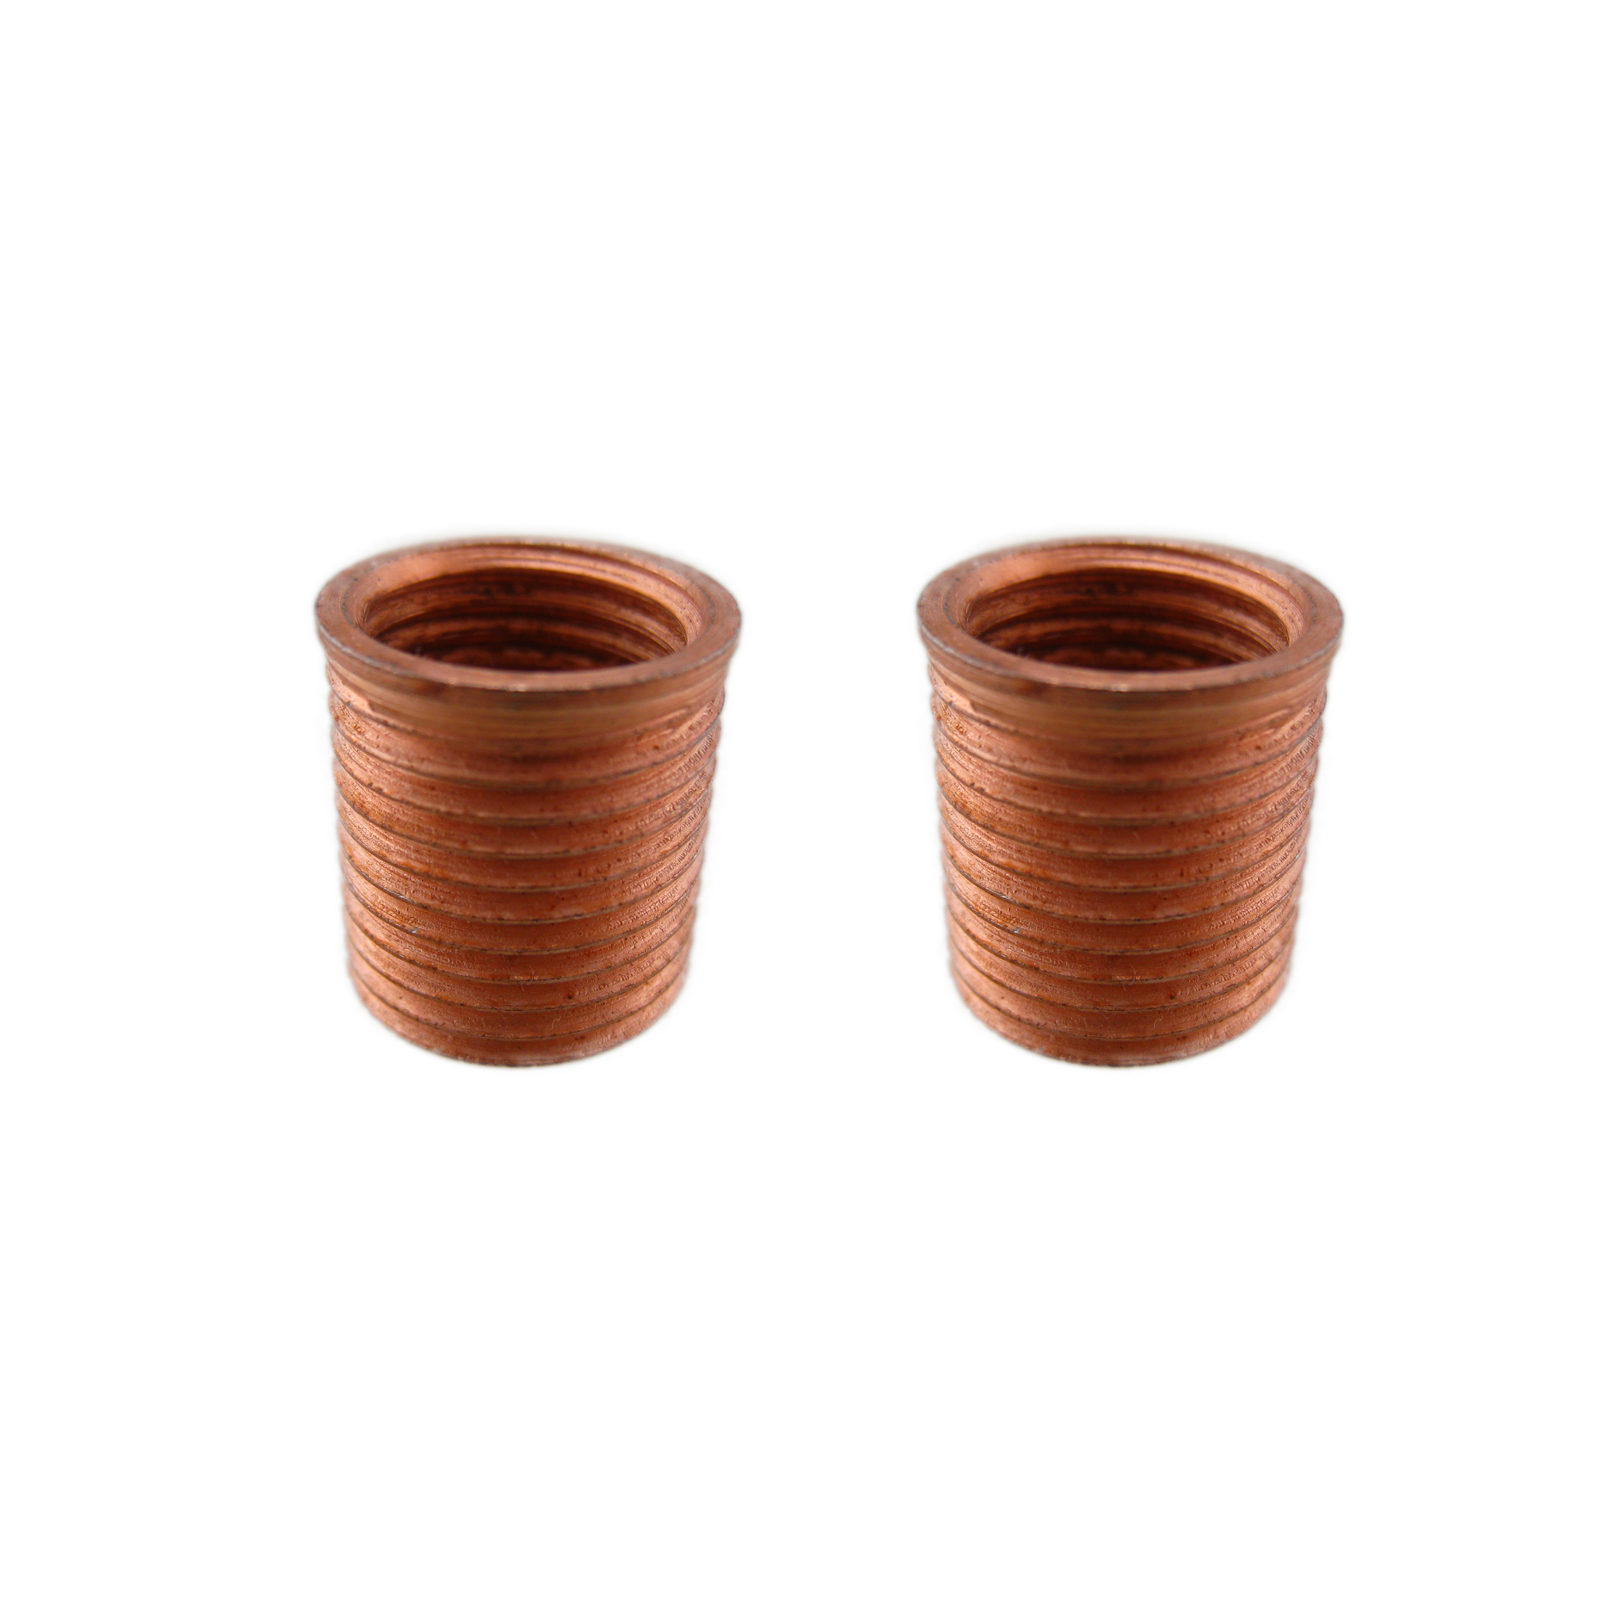 washer-2-pack